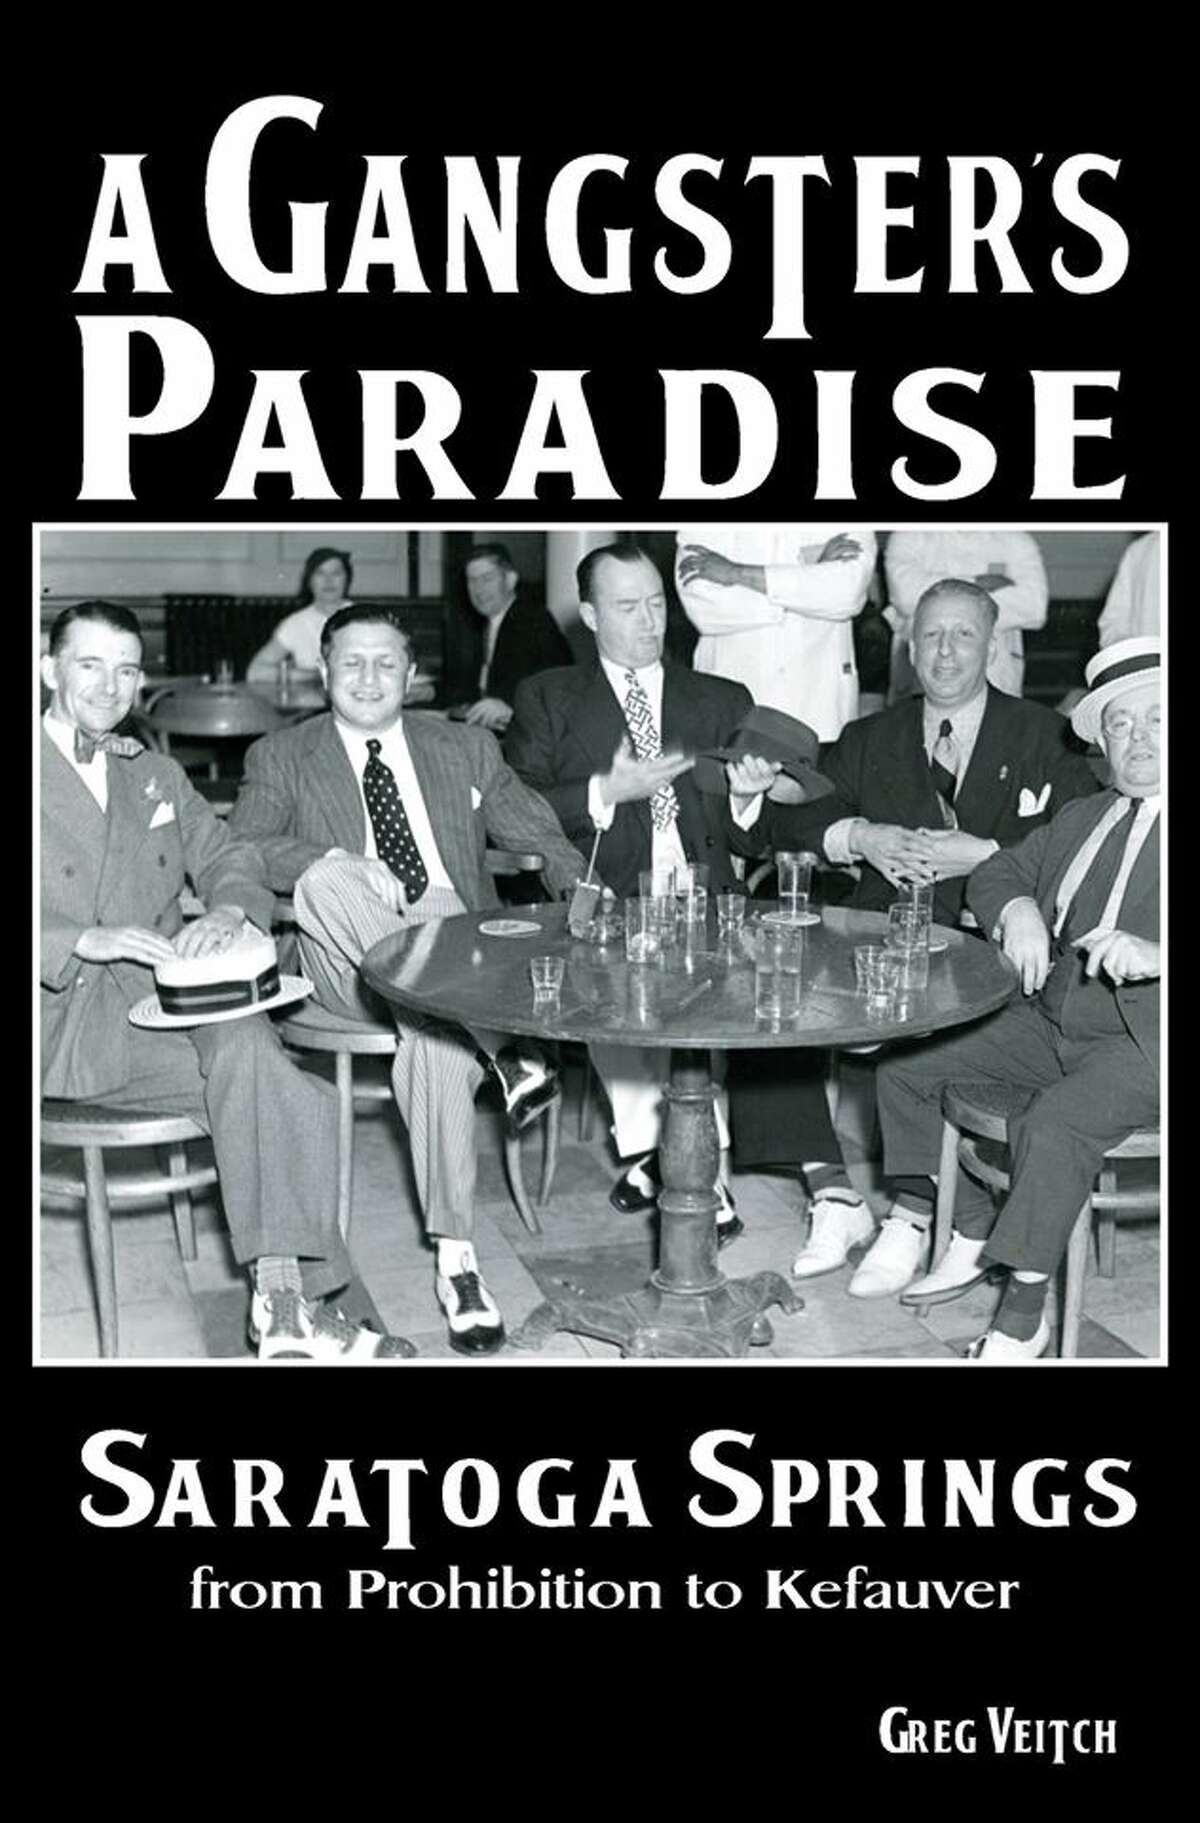 "A Gangster's Paradise: Saratoga Springs from Prohibition to Kefauver" by Greg Veitch